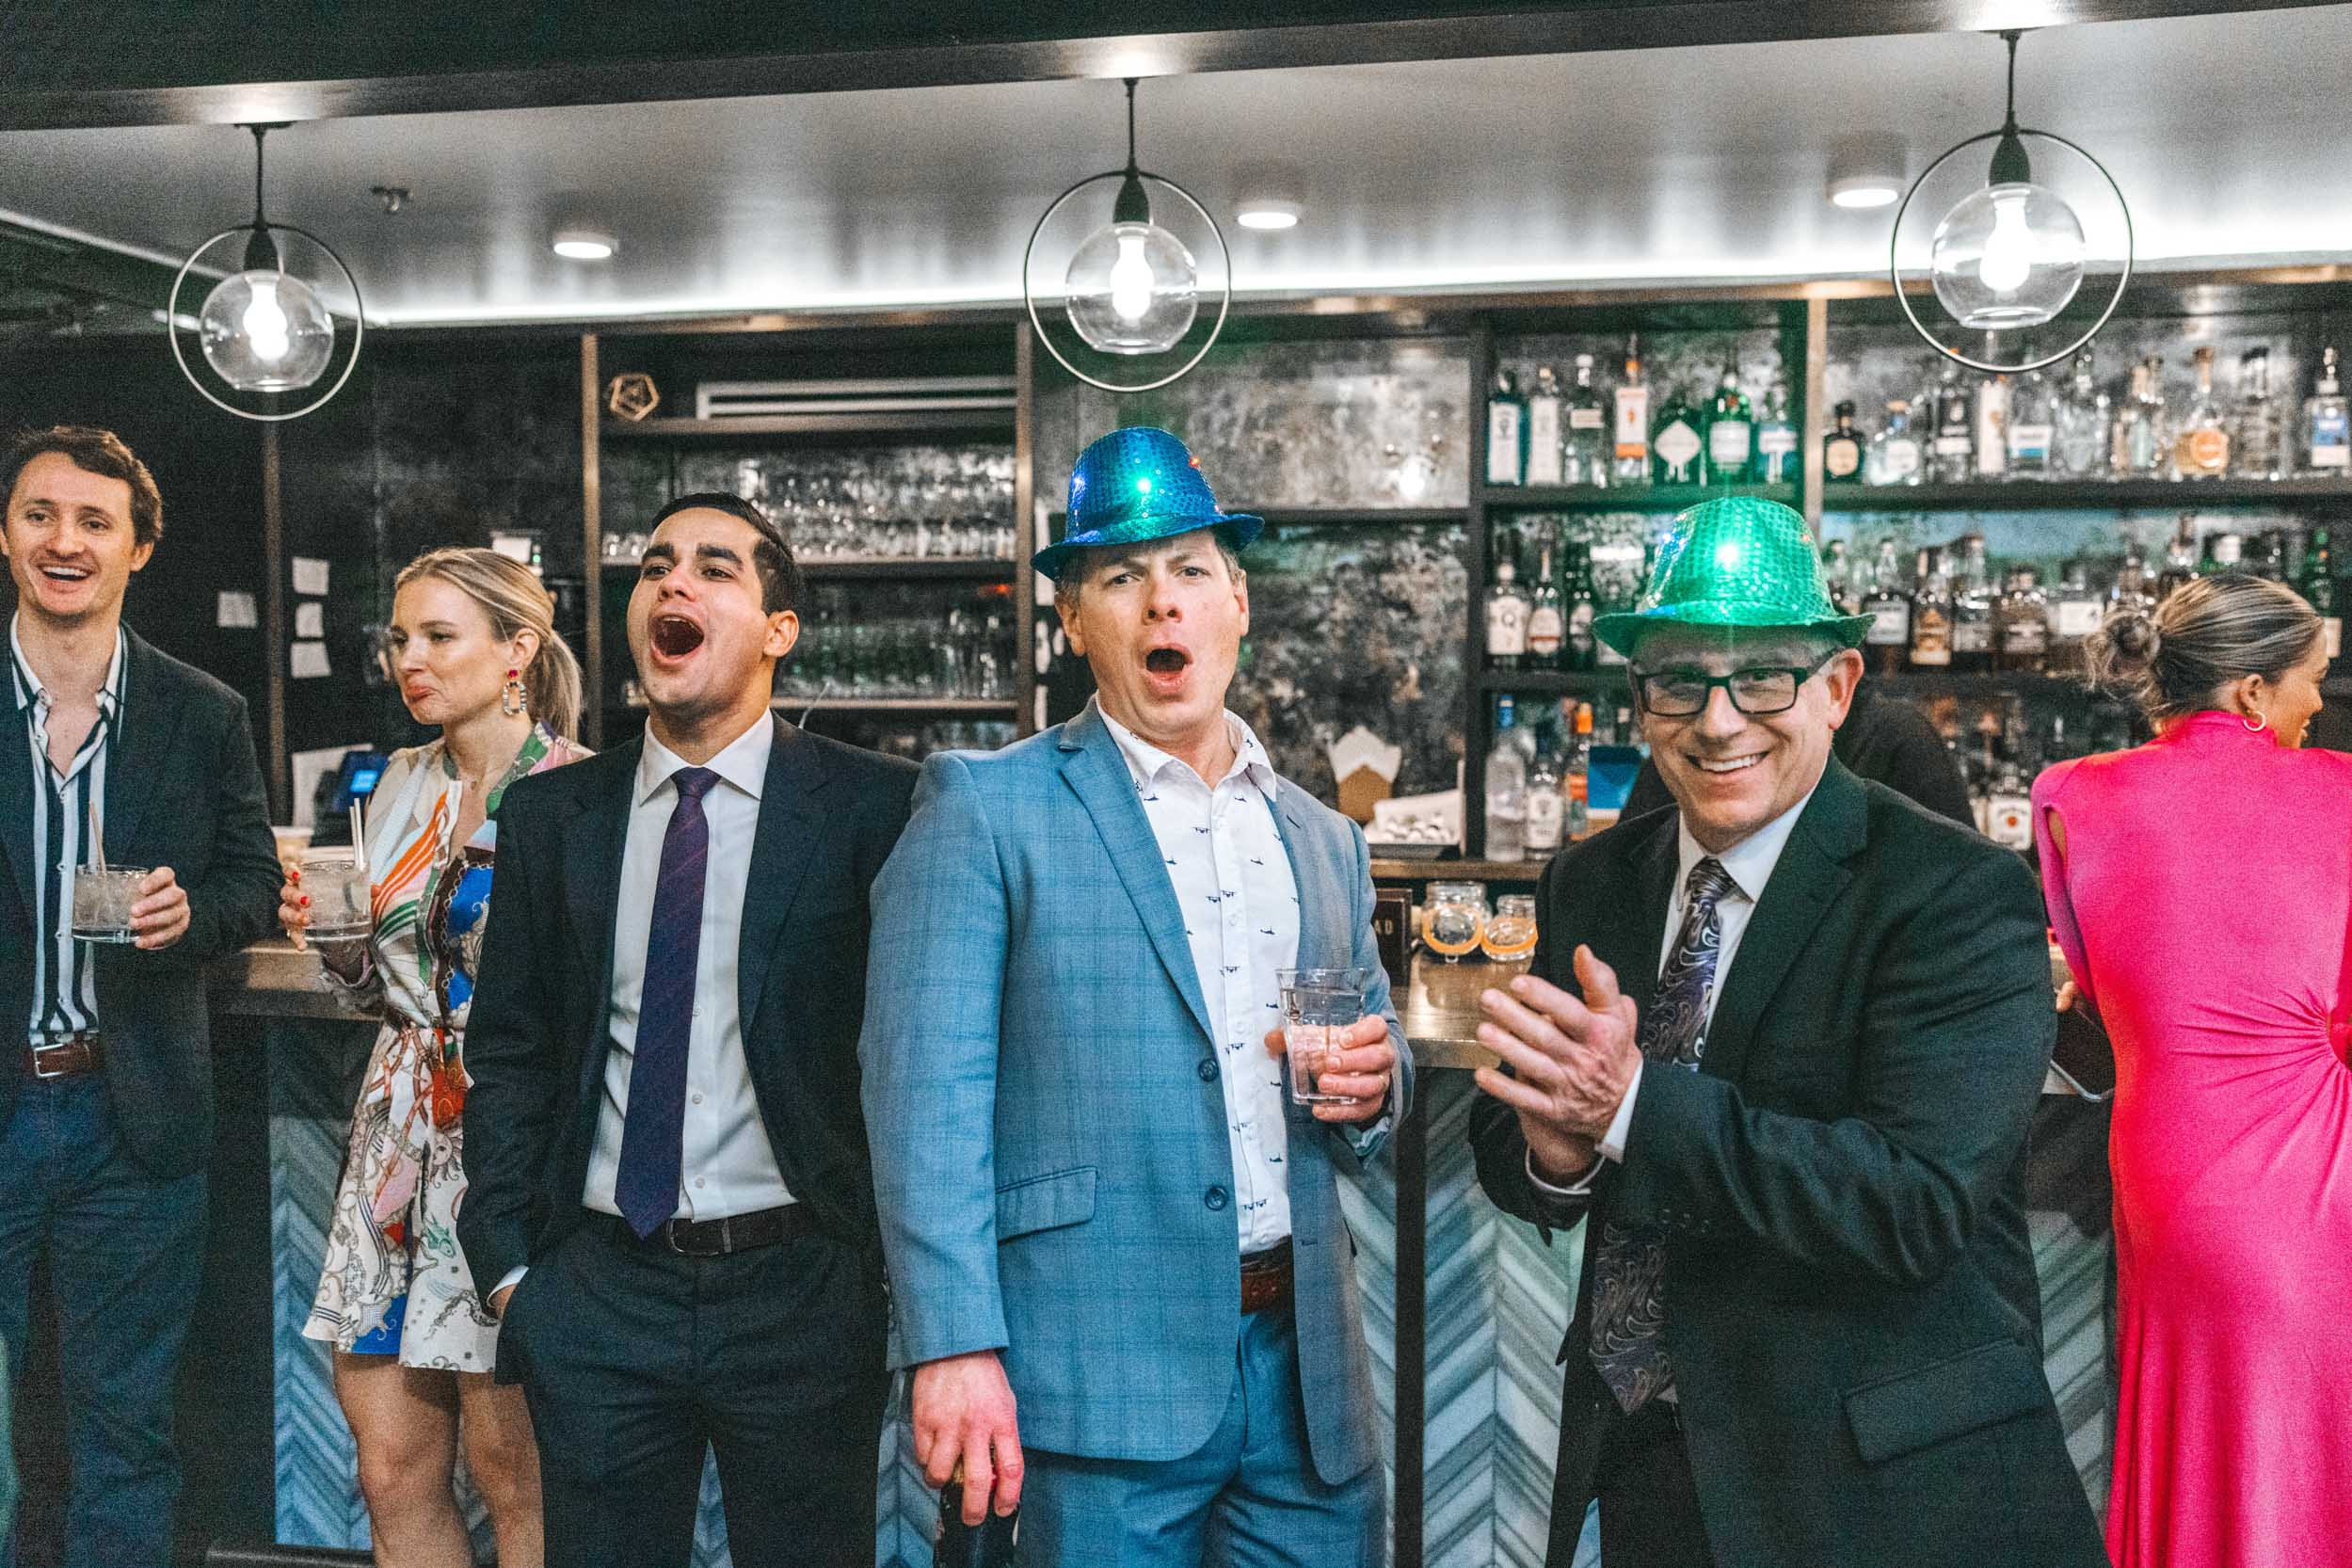 Wedding guests wearing hats and celebrating at Capulet bar in New Orleans